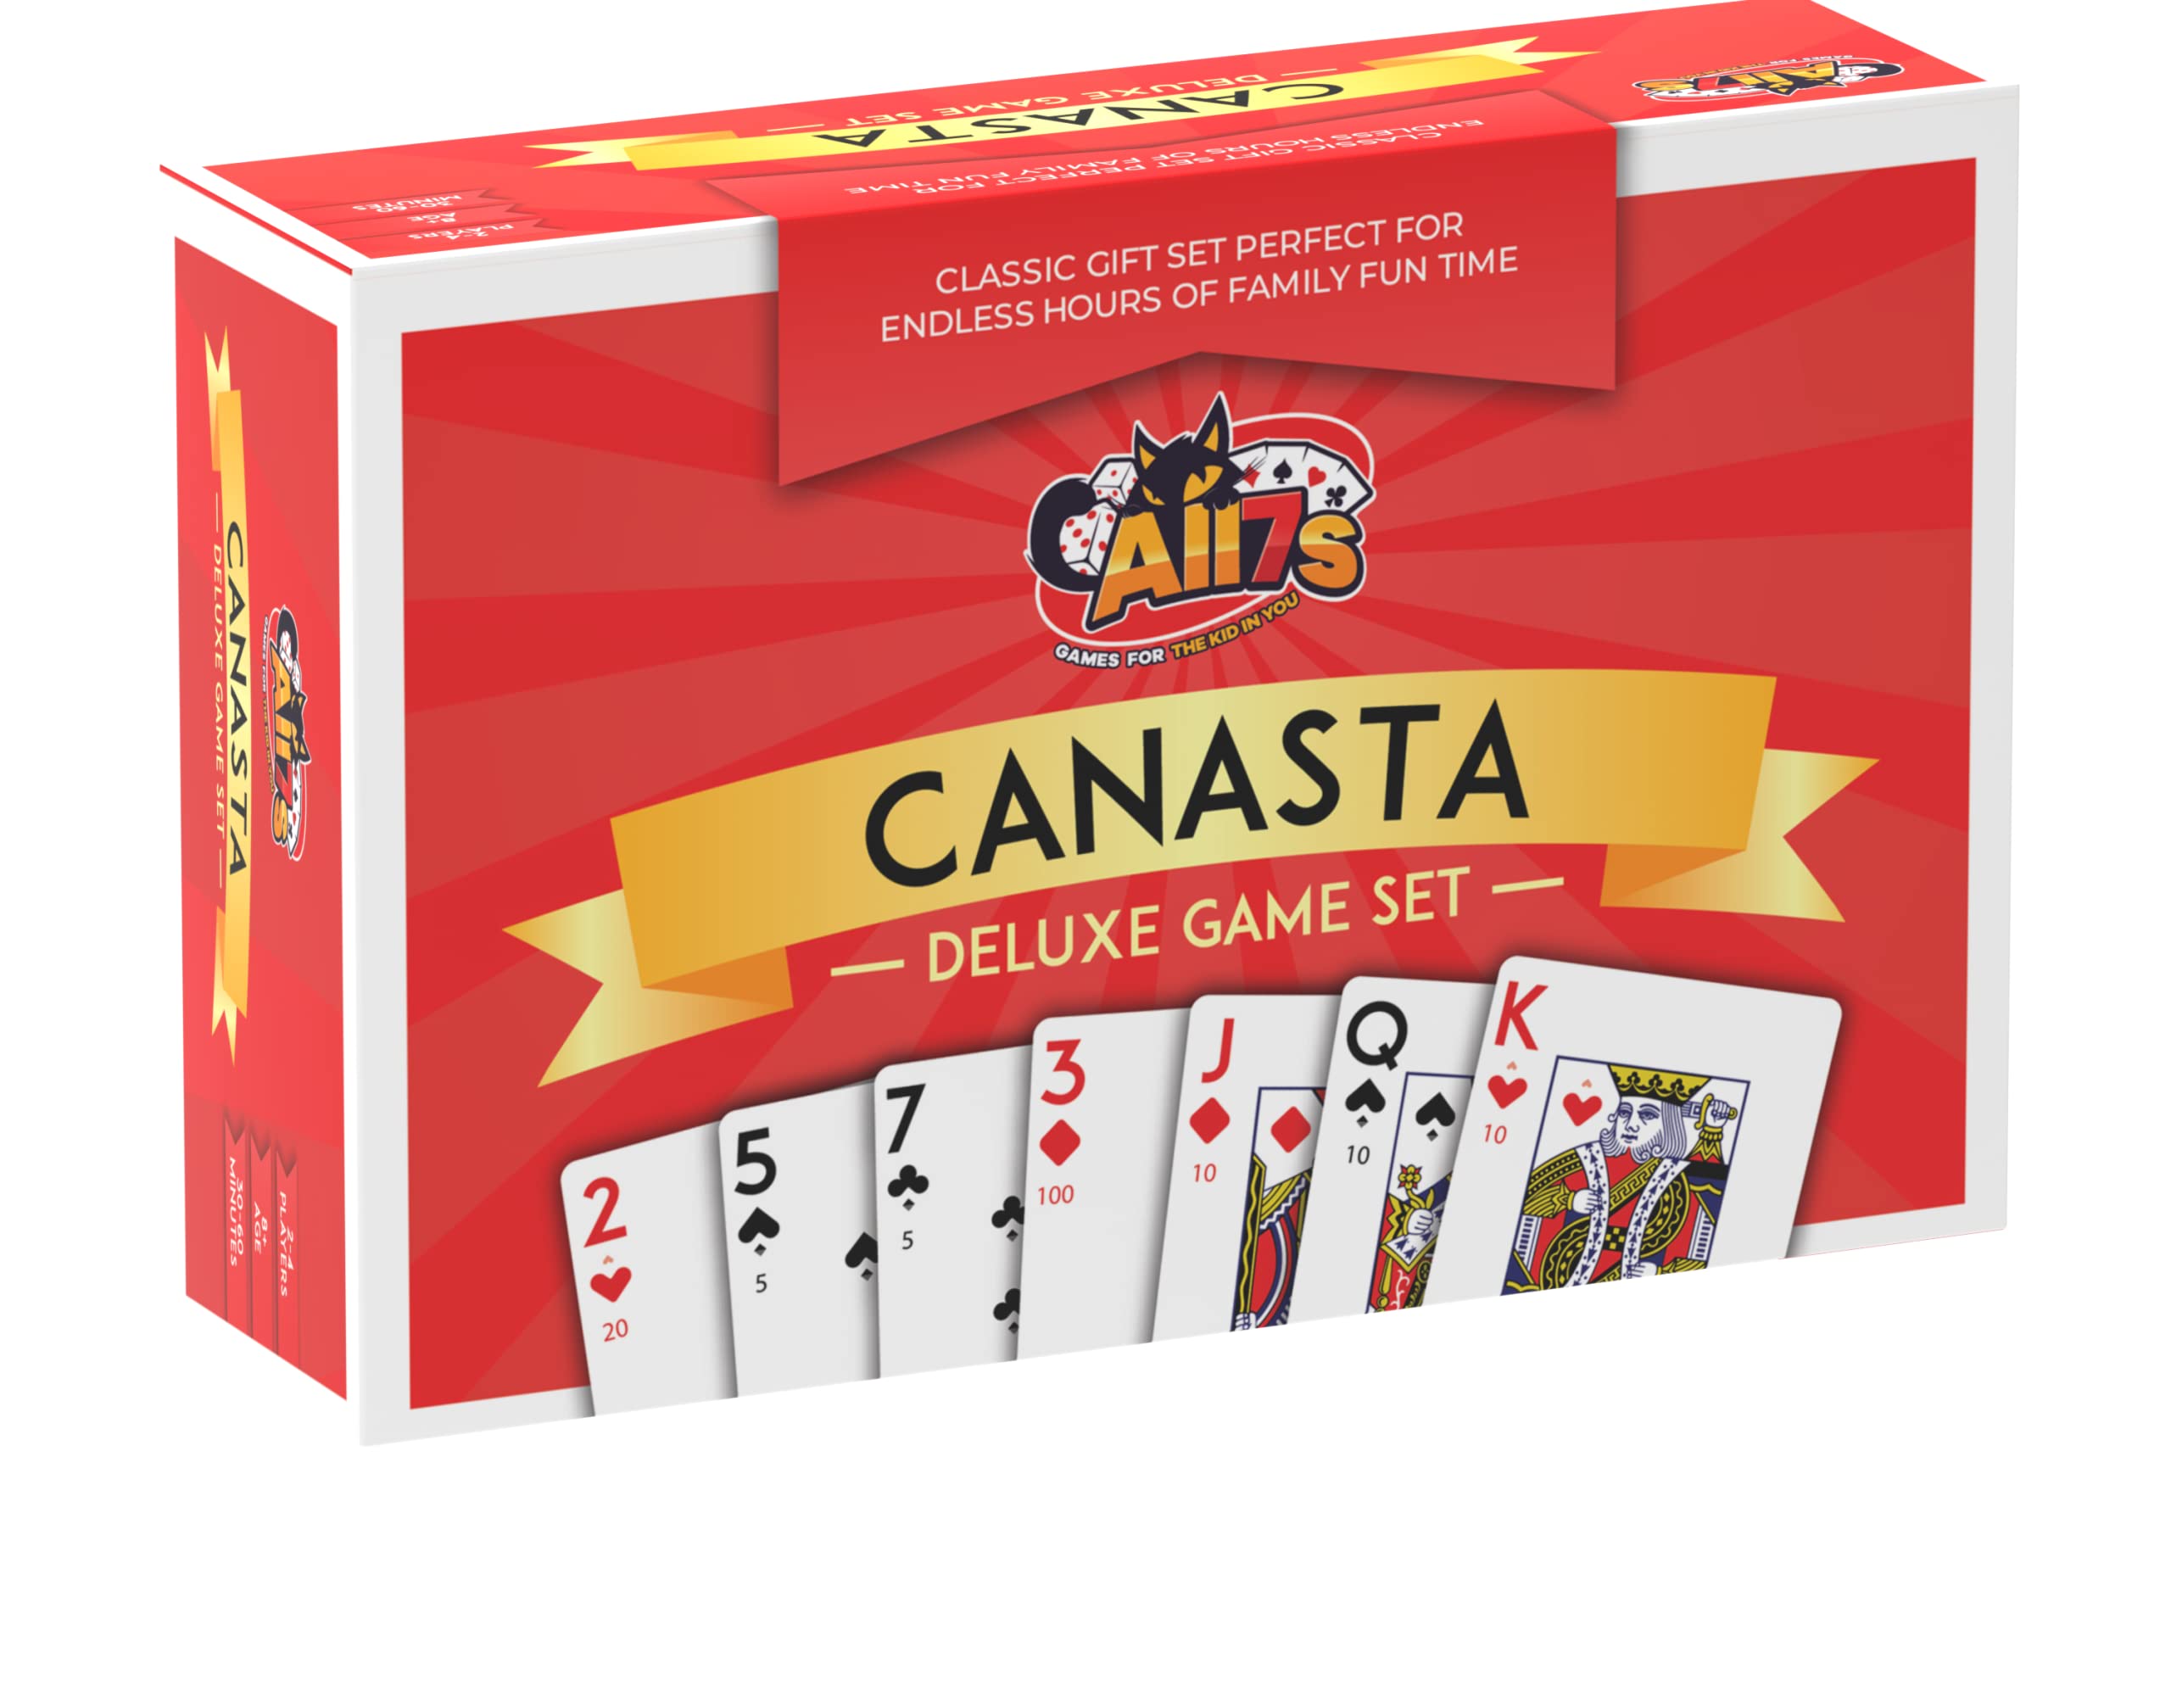 All7s Canasta Cards Game Set with Canasta Cards with Point Values on Cards, Canasta Playing Cards Score Pads and Canasta Card Ho